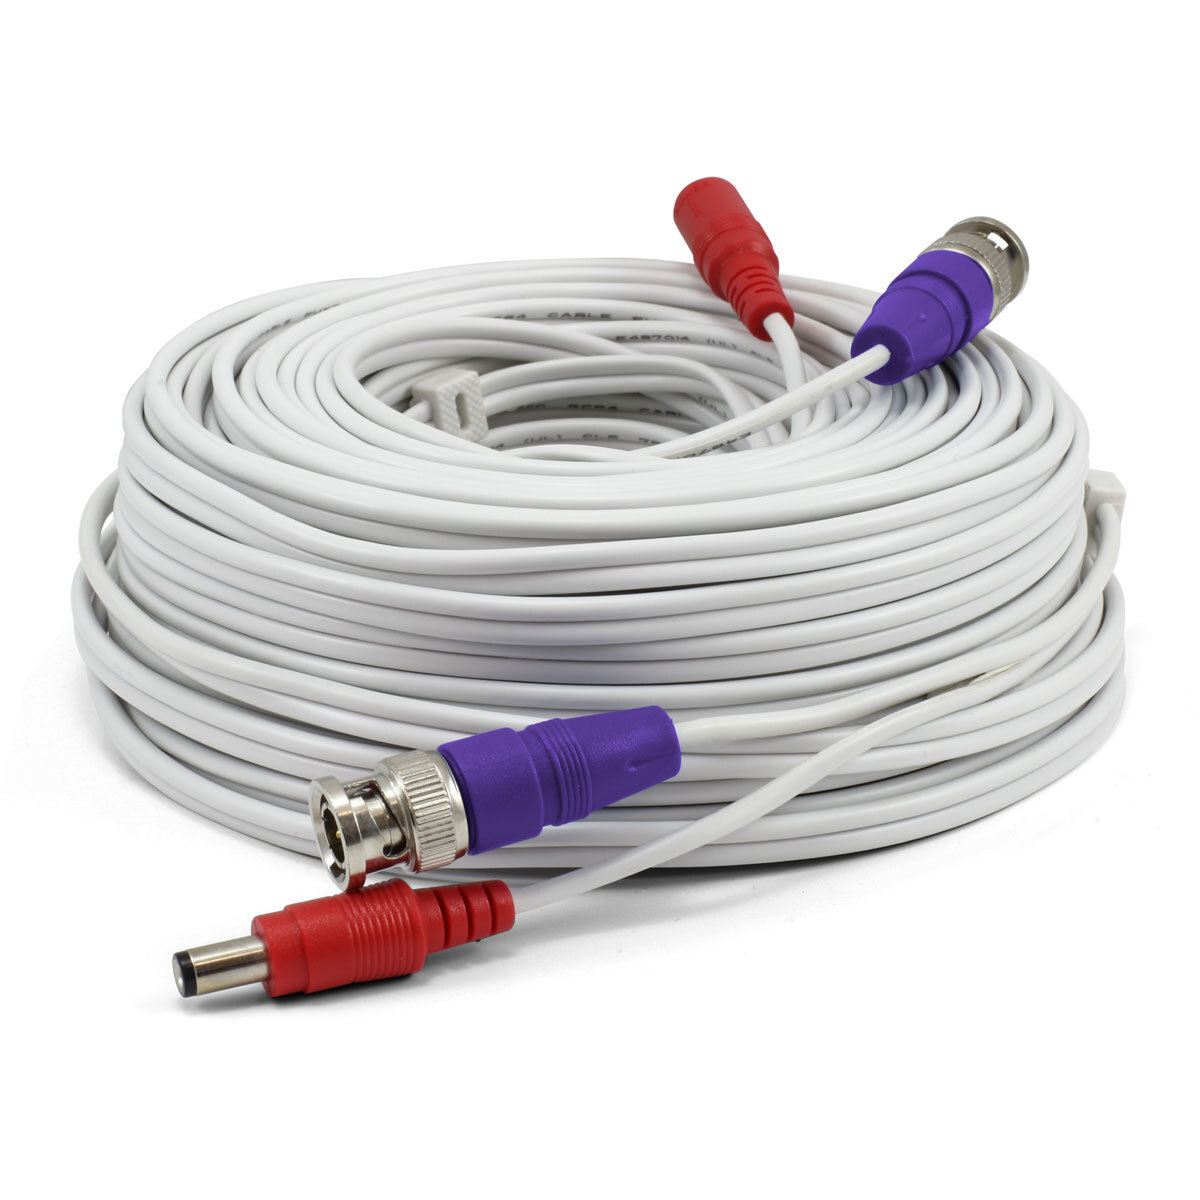 Swann 100ft (30m) BNC CCTV Extension Cable, SWPRO-30ULCBL-GL